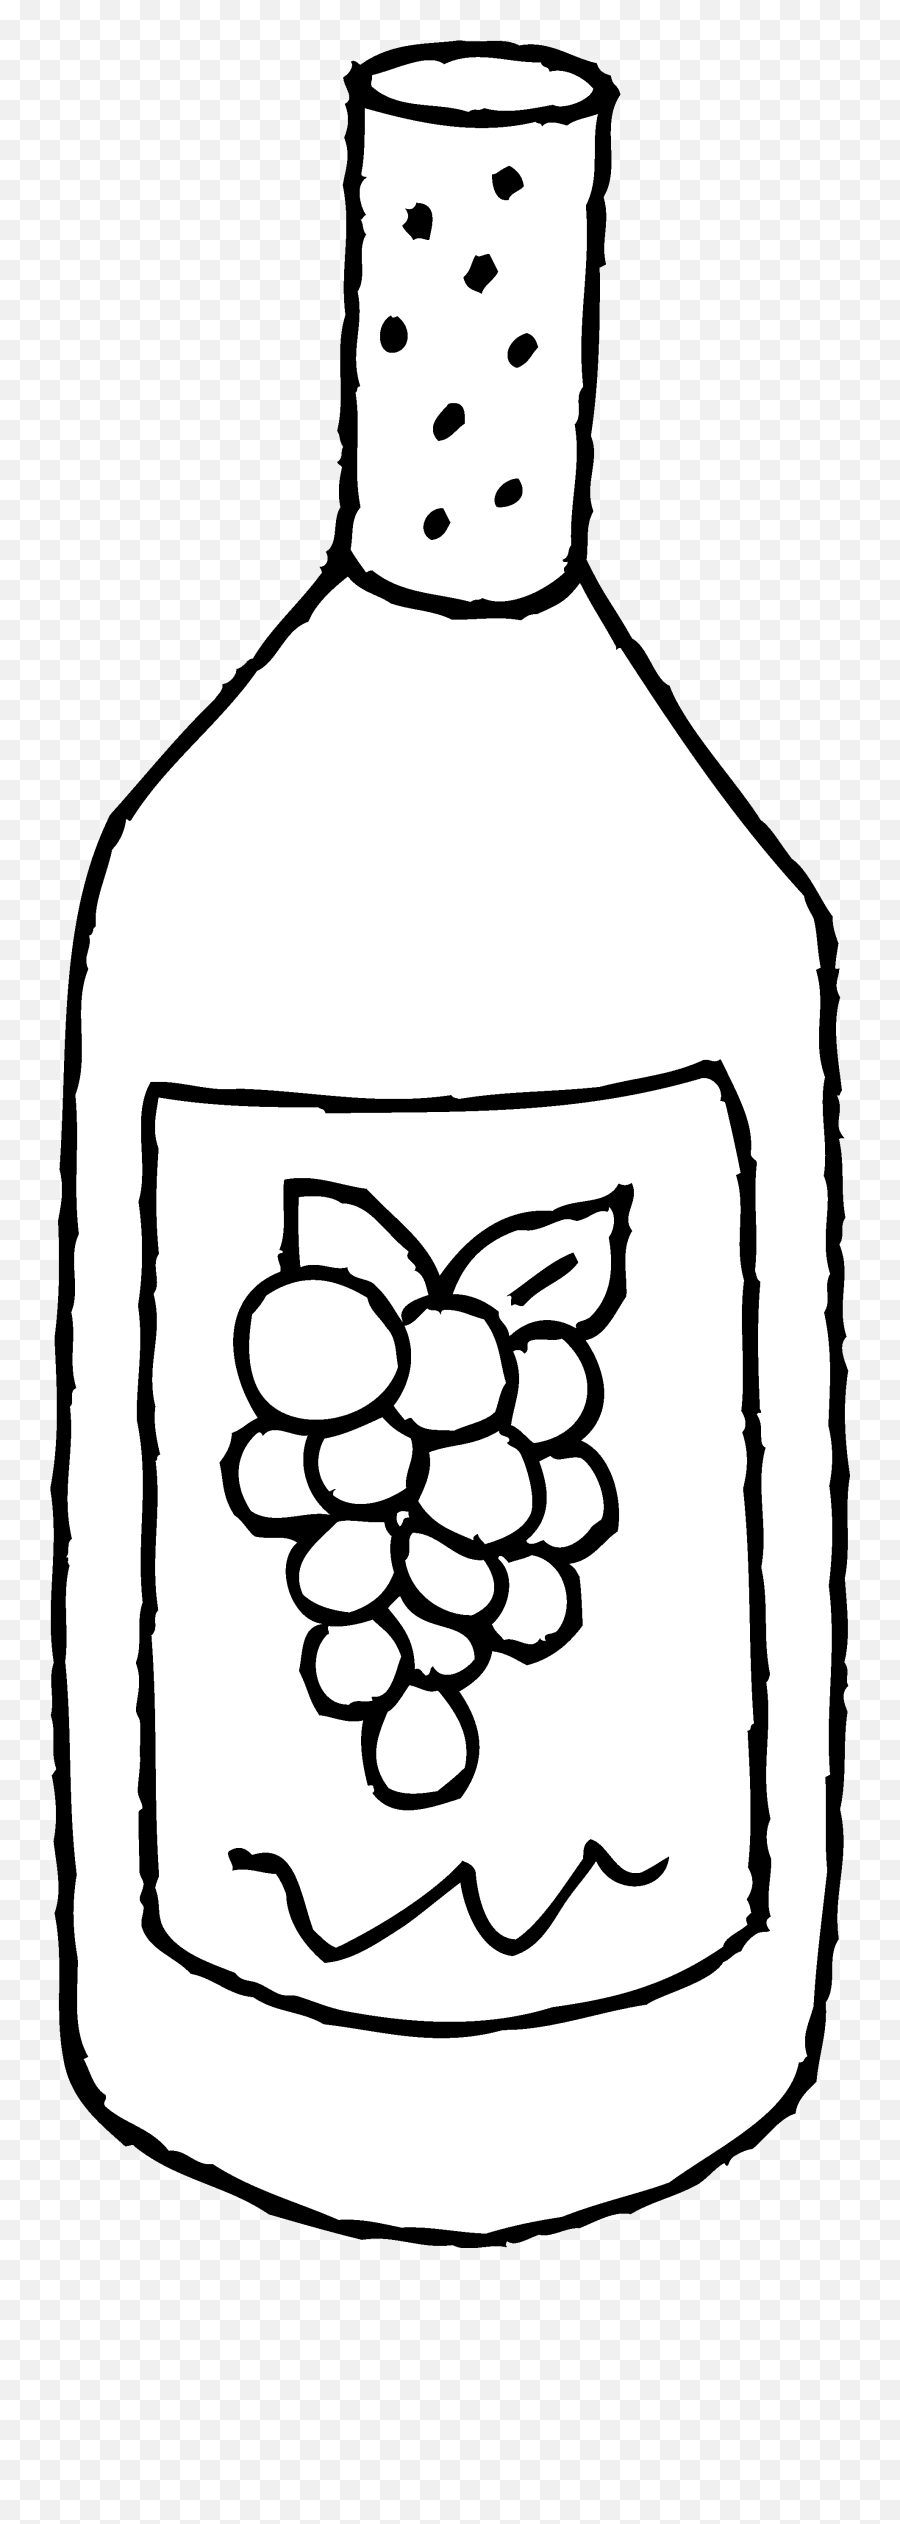 Bottle Of Wine Clipart Black And White - Clip Art Library Emoji,Wine Bottle And Glass Clipart